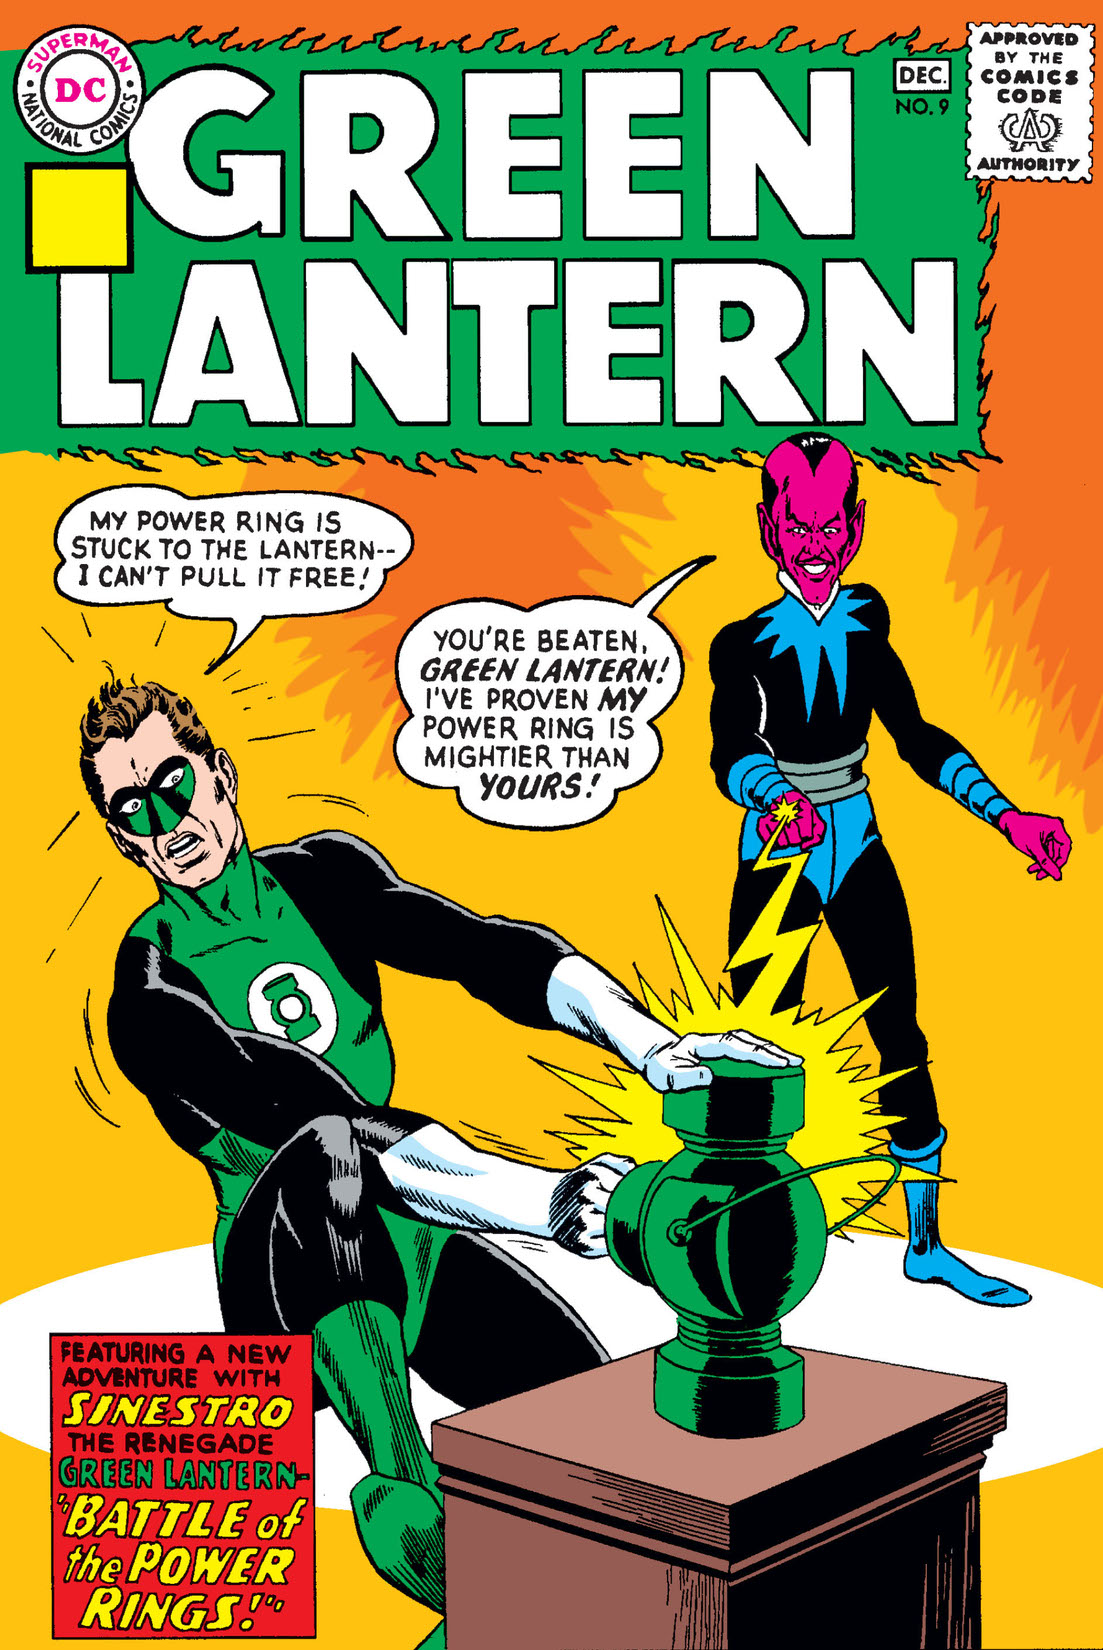 Green Lantern (1960-) #9 preview images